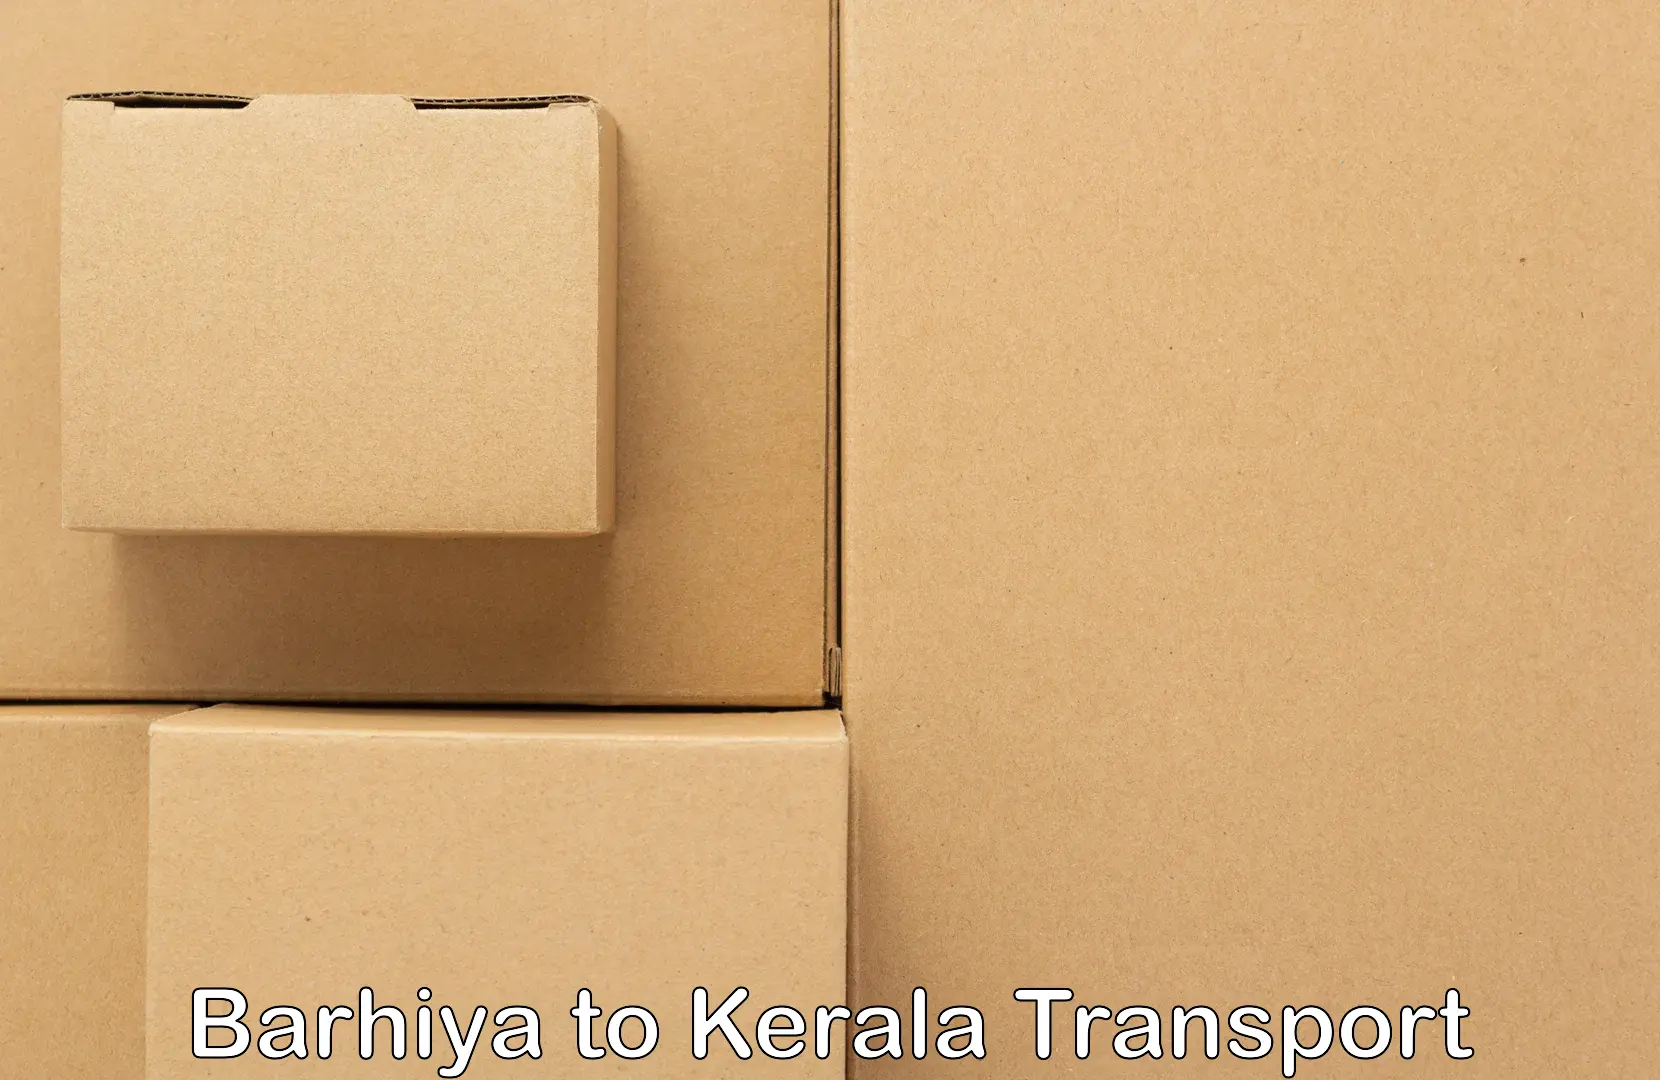 Air cargo transport services Barhiya to Cochin University of Science and Technology